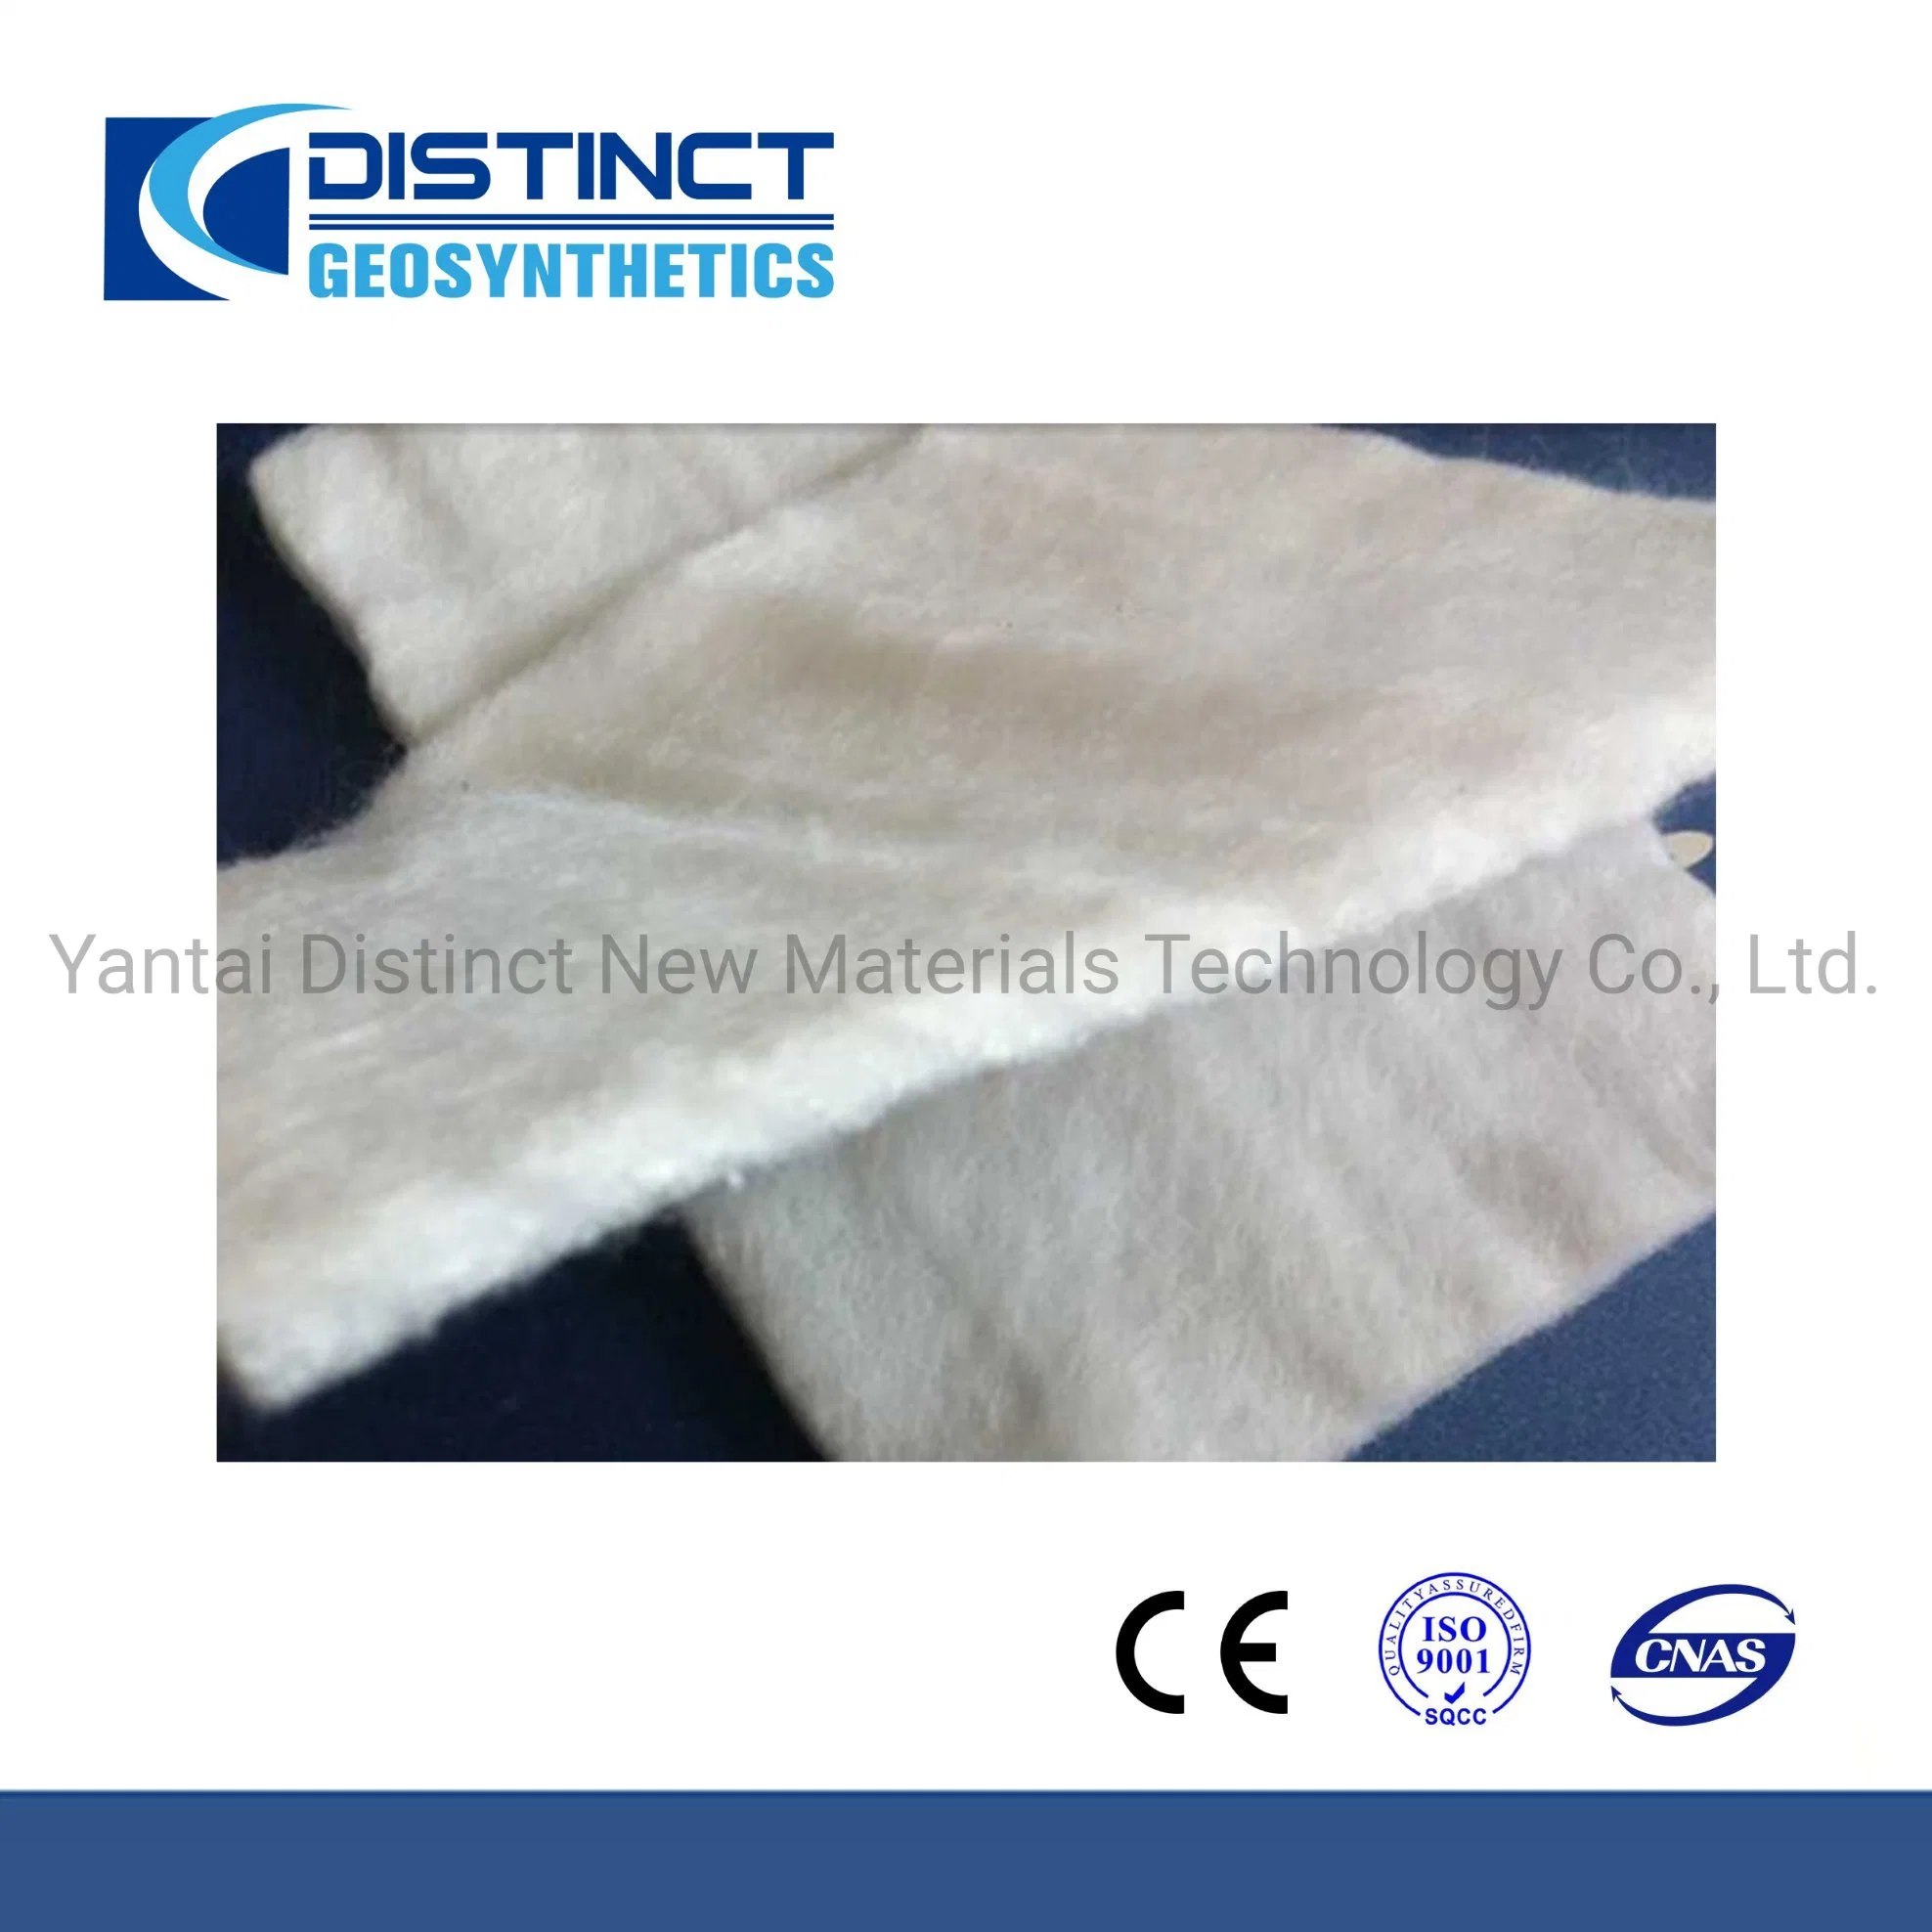 Needle Punched Nonwoven Geotextile 340G/M2, Good Price